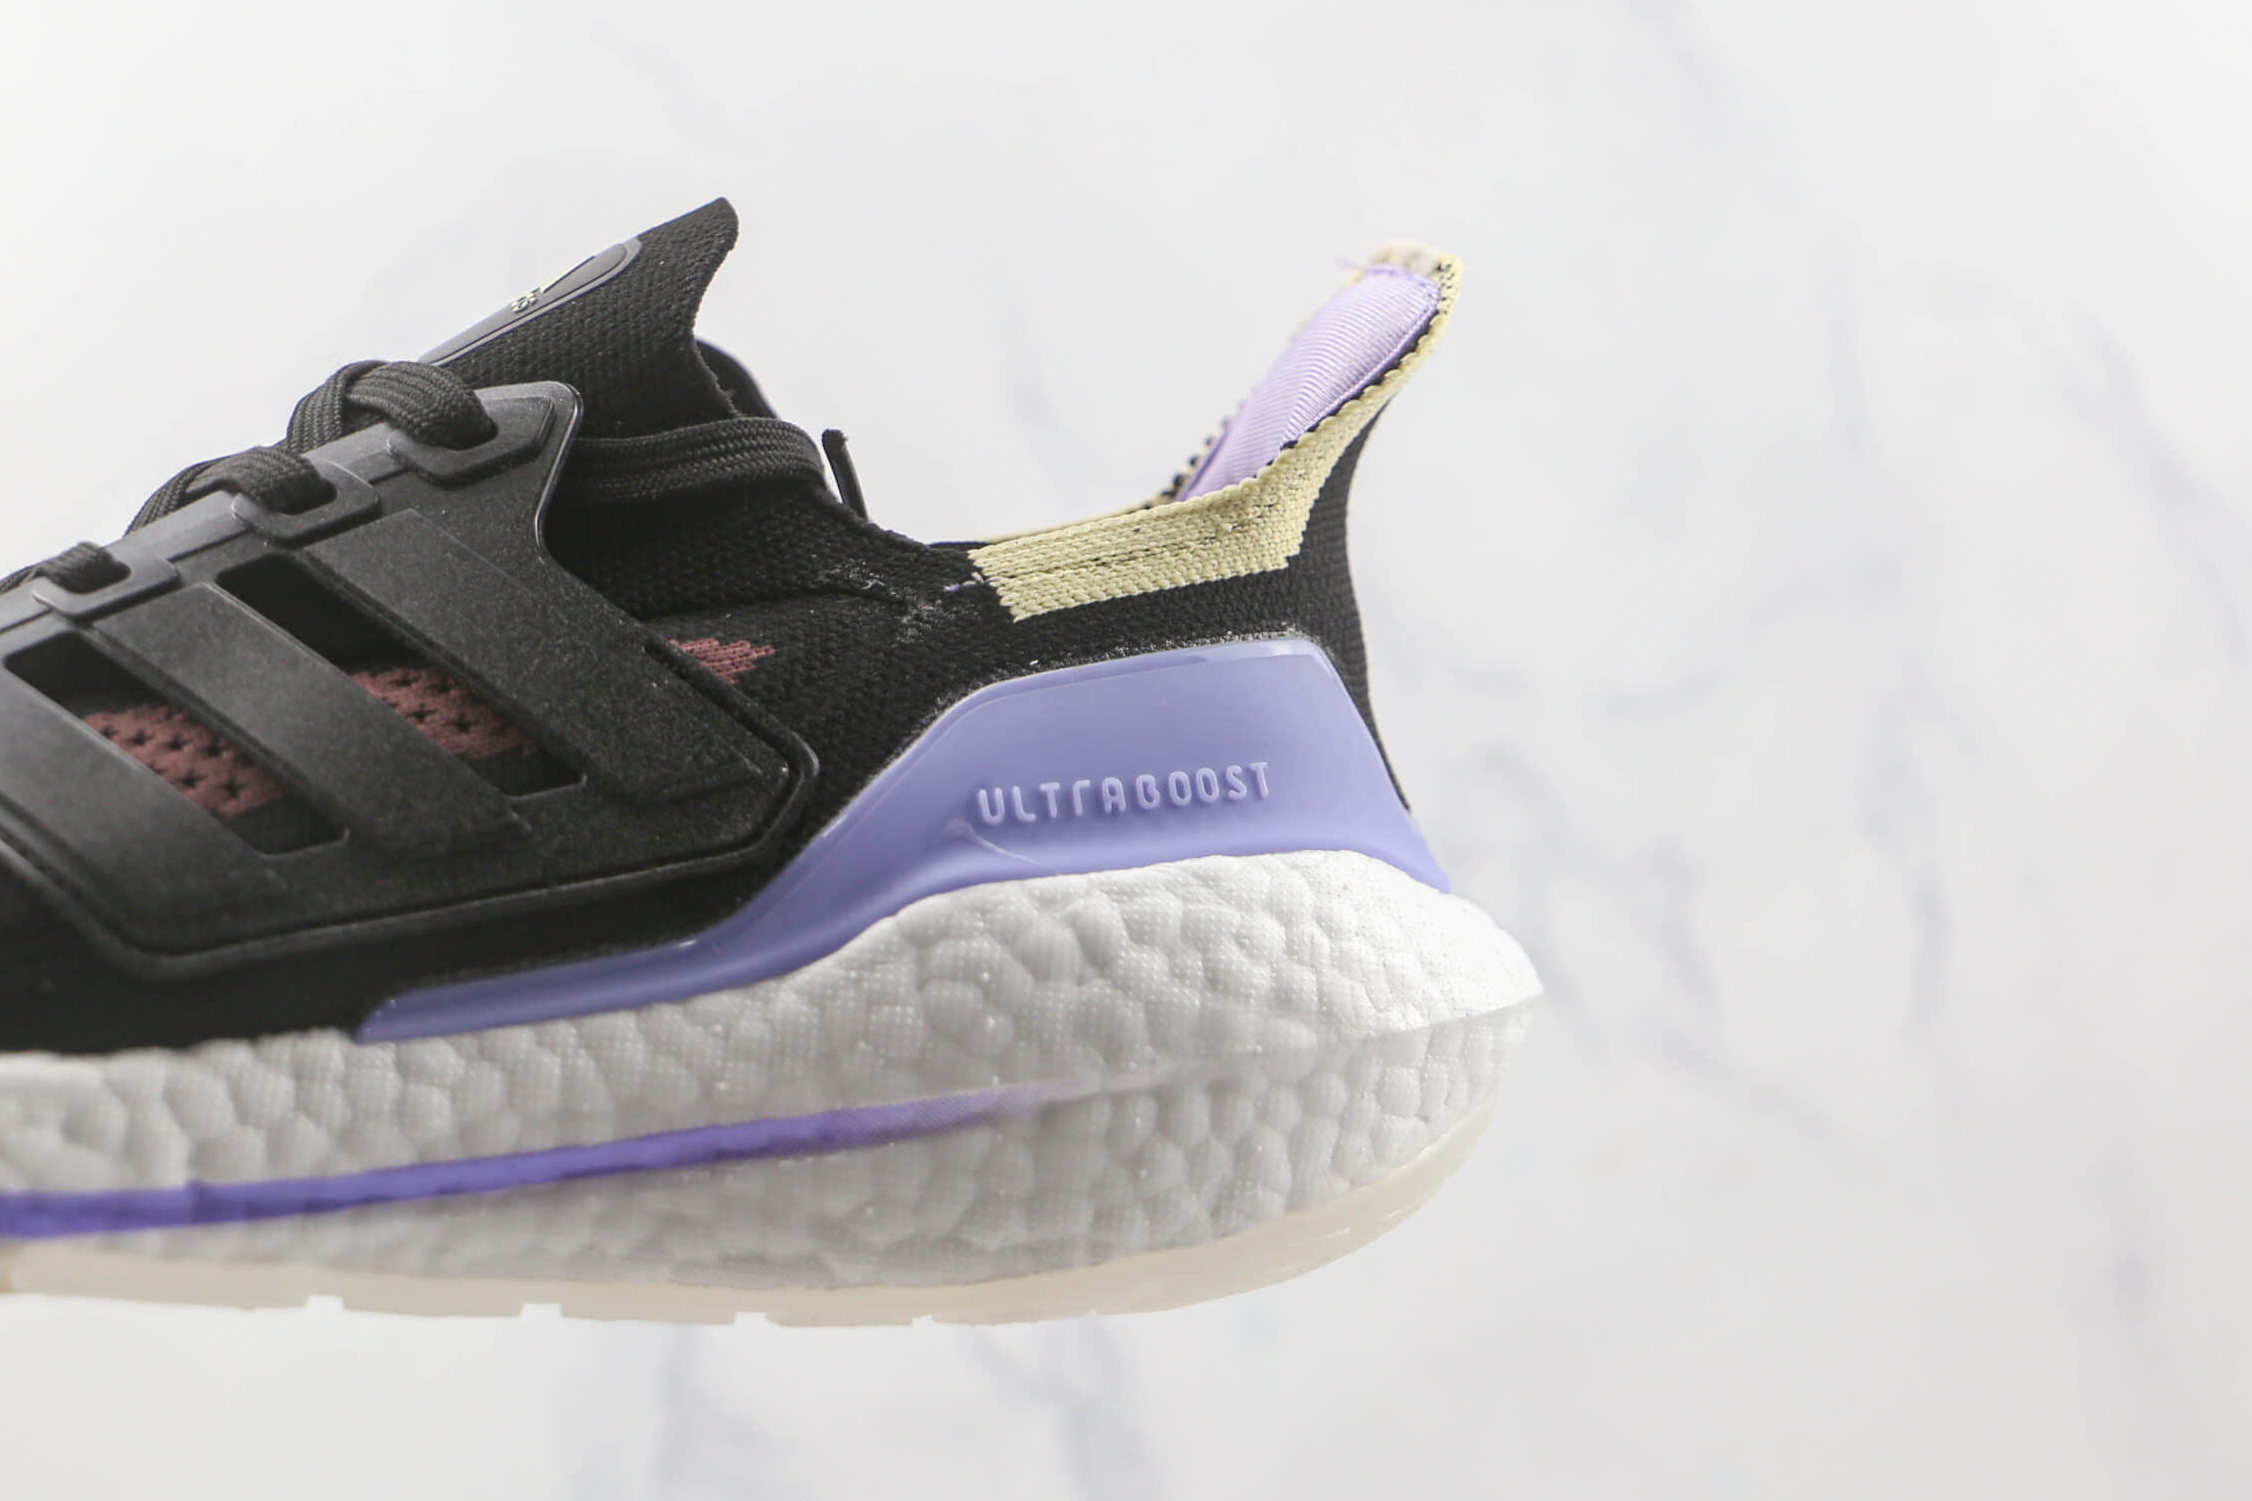 Adidas UltraBoost 21 Black Violet Tone S23841 - Latest Release and Stylish Performance Footwear